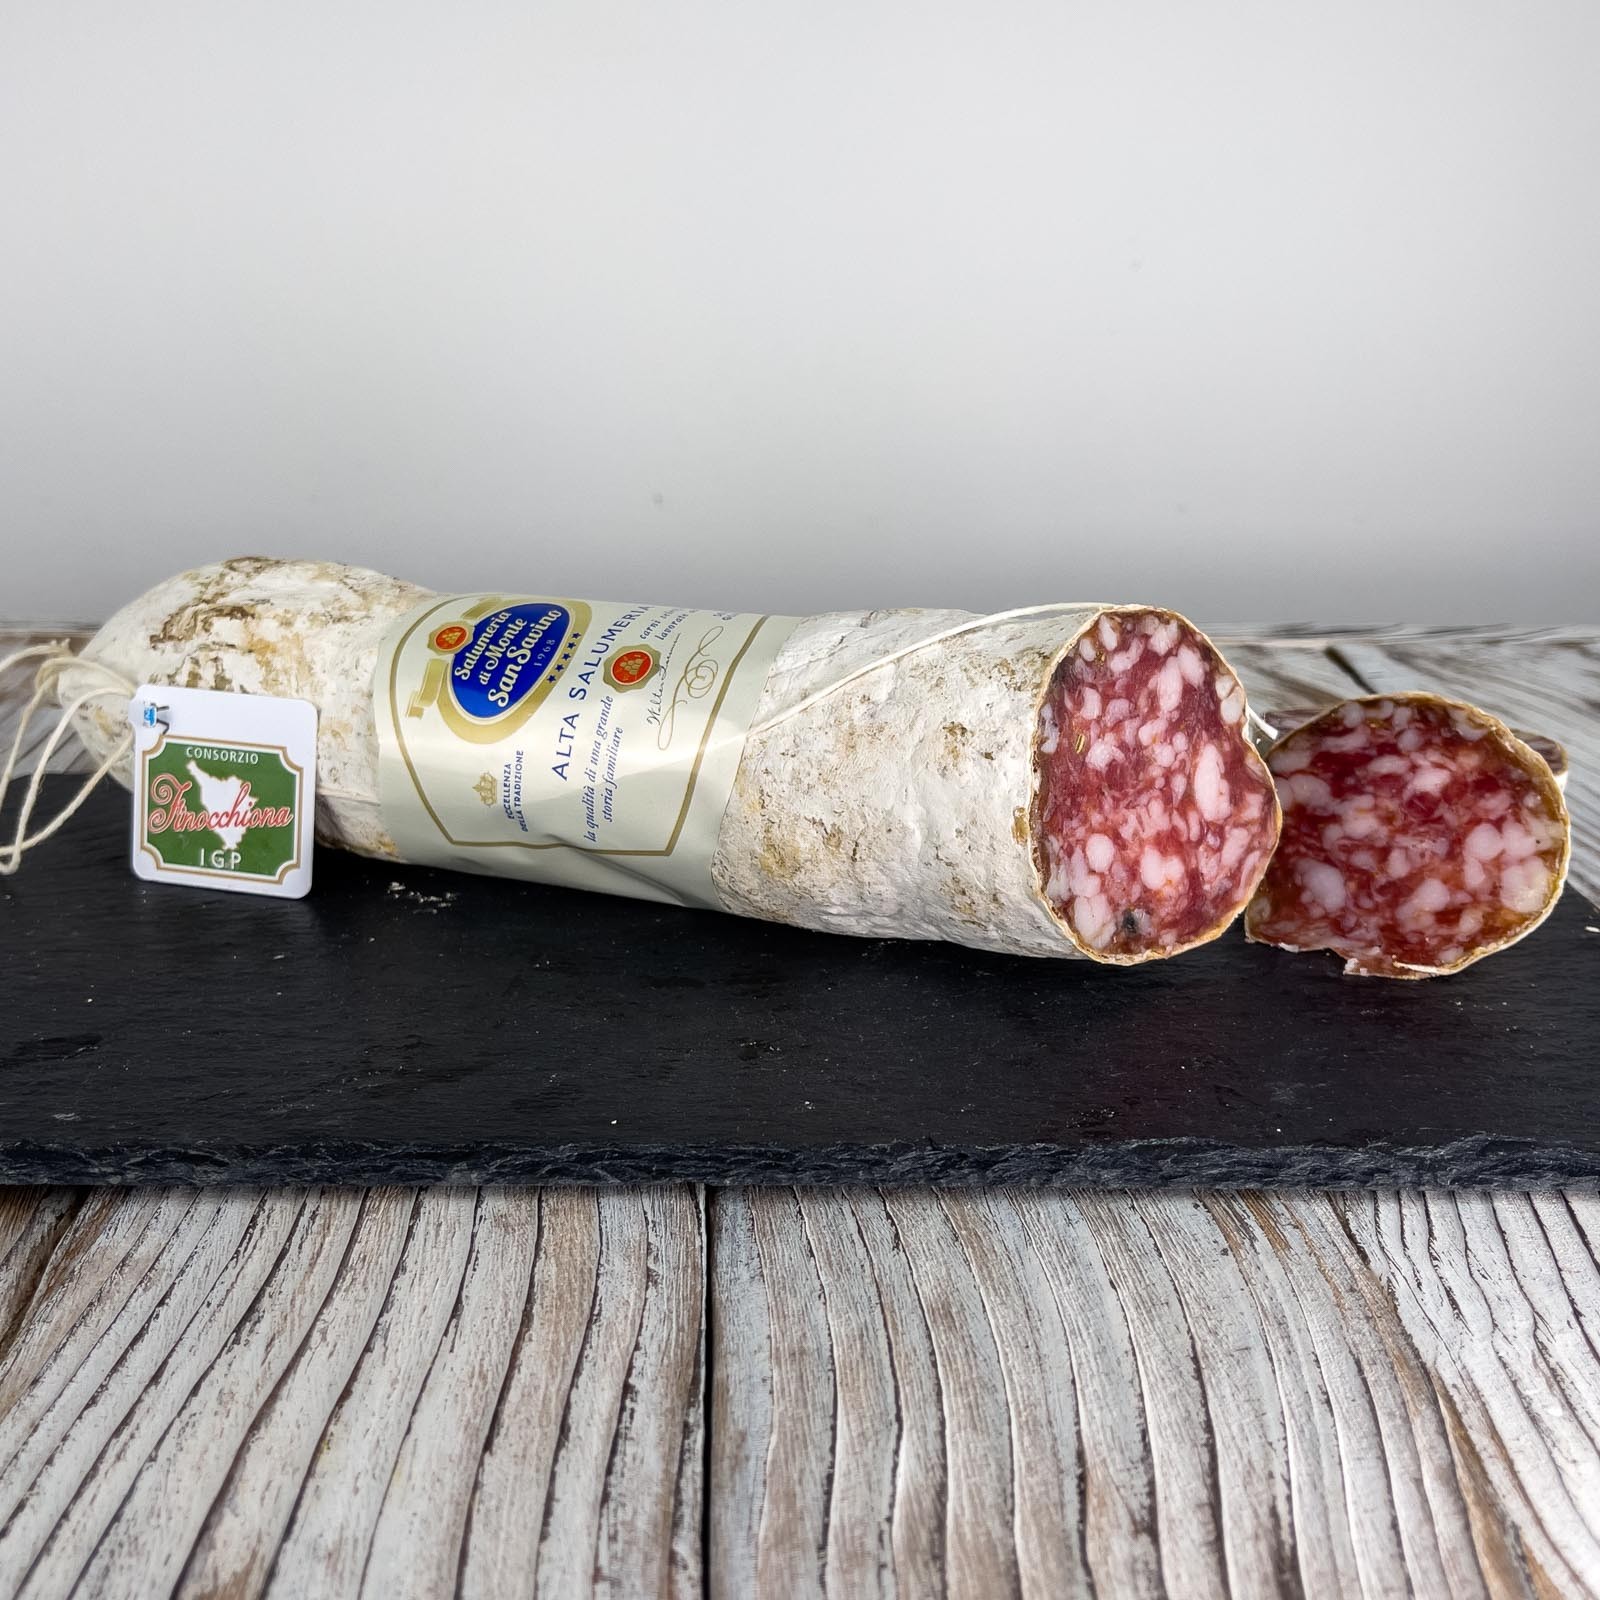 PGI Finocchiona is one of the most famous Tuscan cured meats. It is produced with pork of excellent quality, minced and kneaded, to which wild fennel seeds are added, which give it the characteristic fresh and at the same time intense aroma. This version of PGI Finocchiona has a net weight of about 500 g and is packaged whole in natural casing.